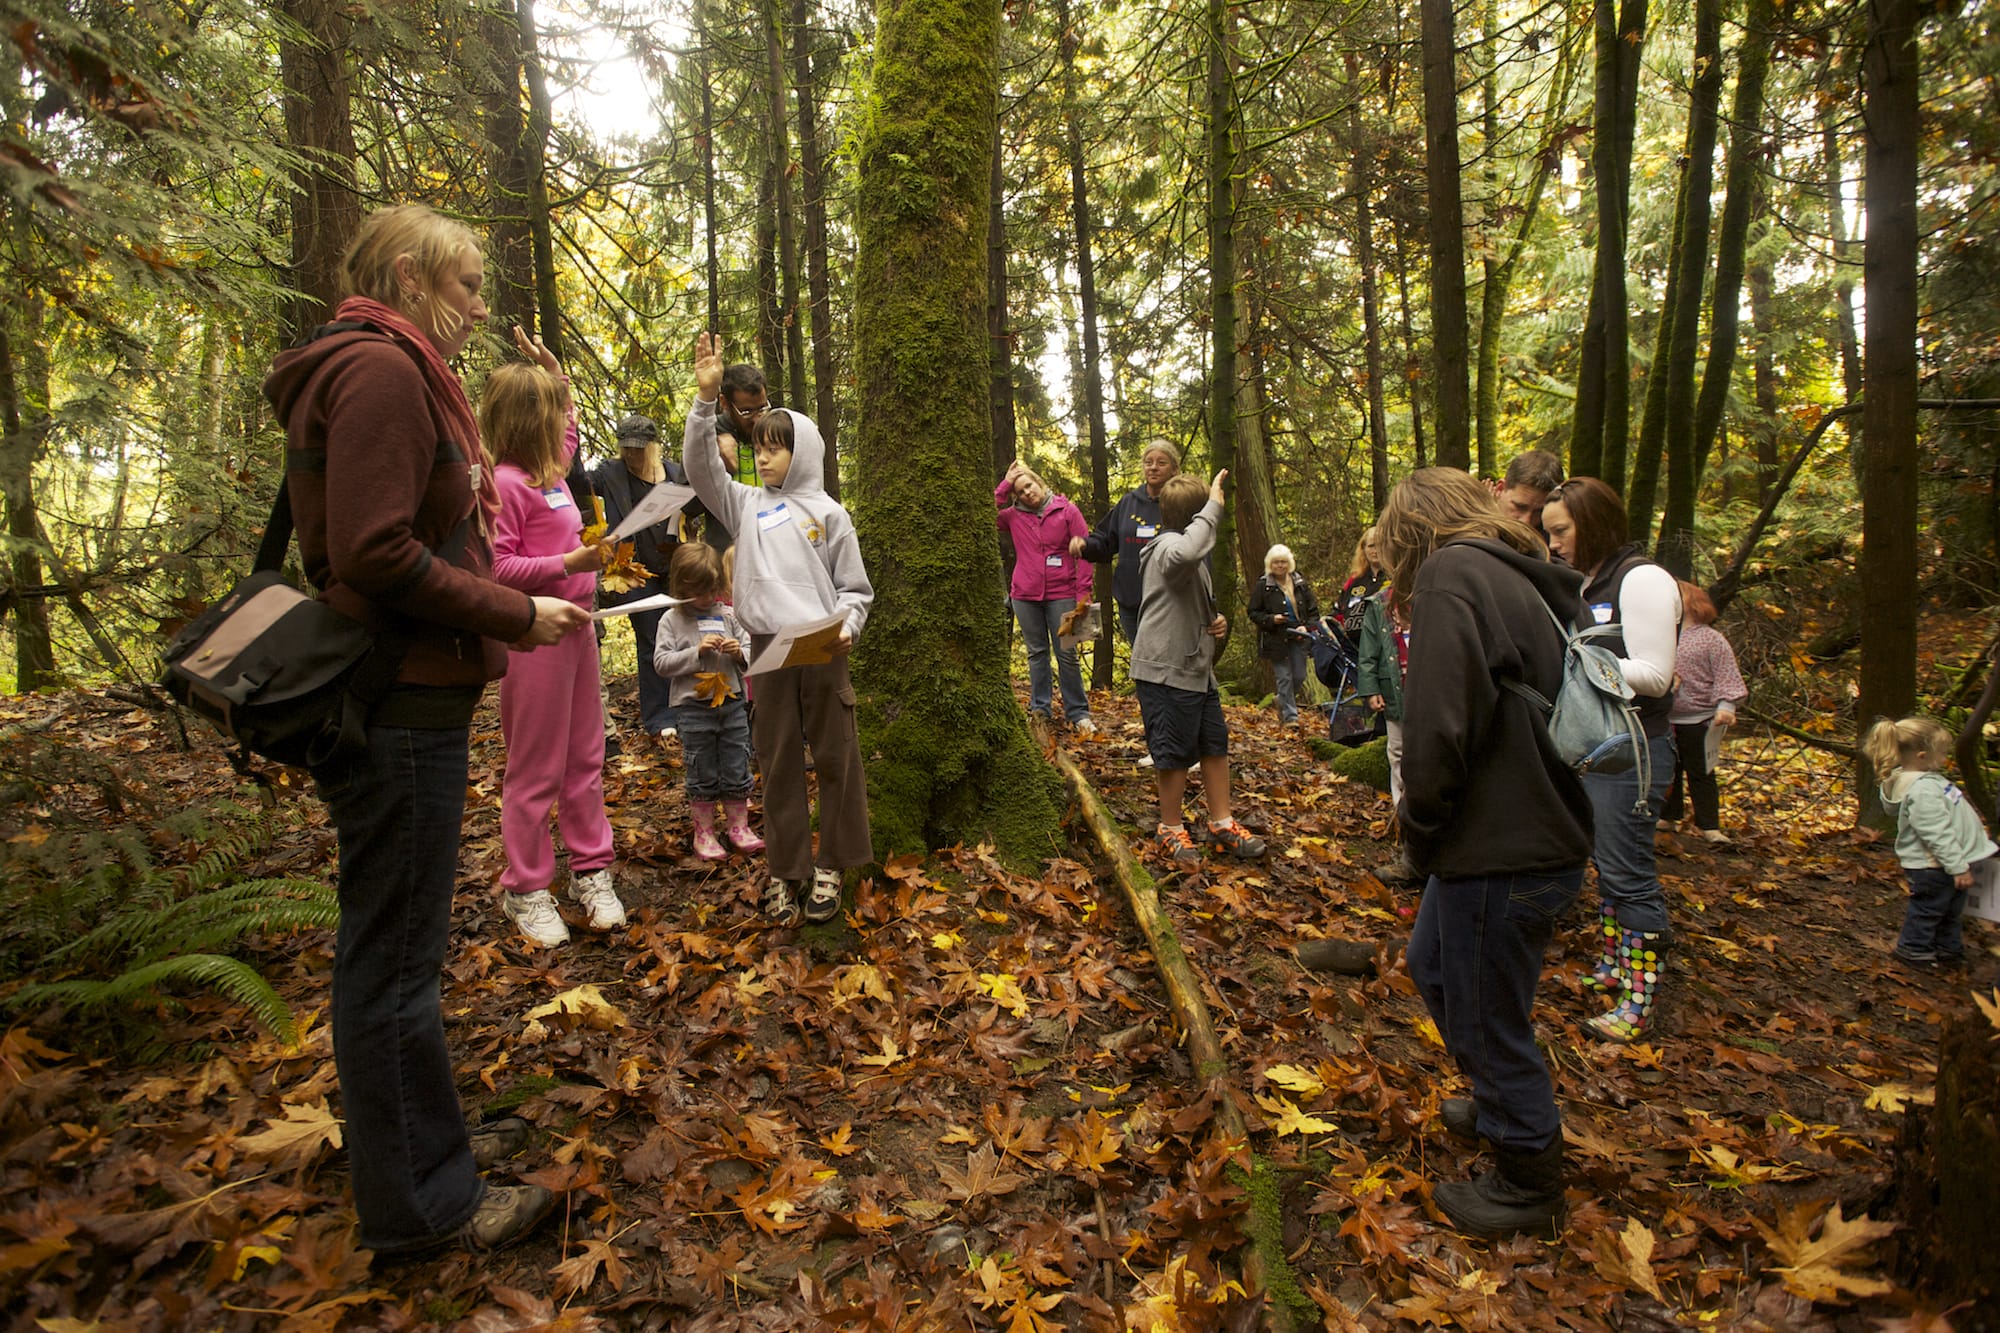 Lauriel Schuman, left, leads a guided mushroom hunting hike at Columbia Springs Family Field Trip Day, Saturday, November 3, 2012.